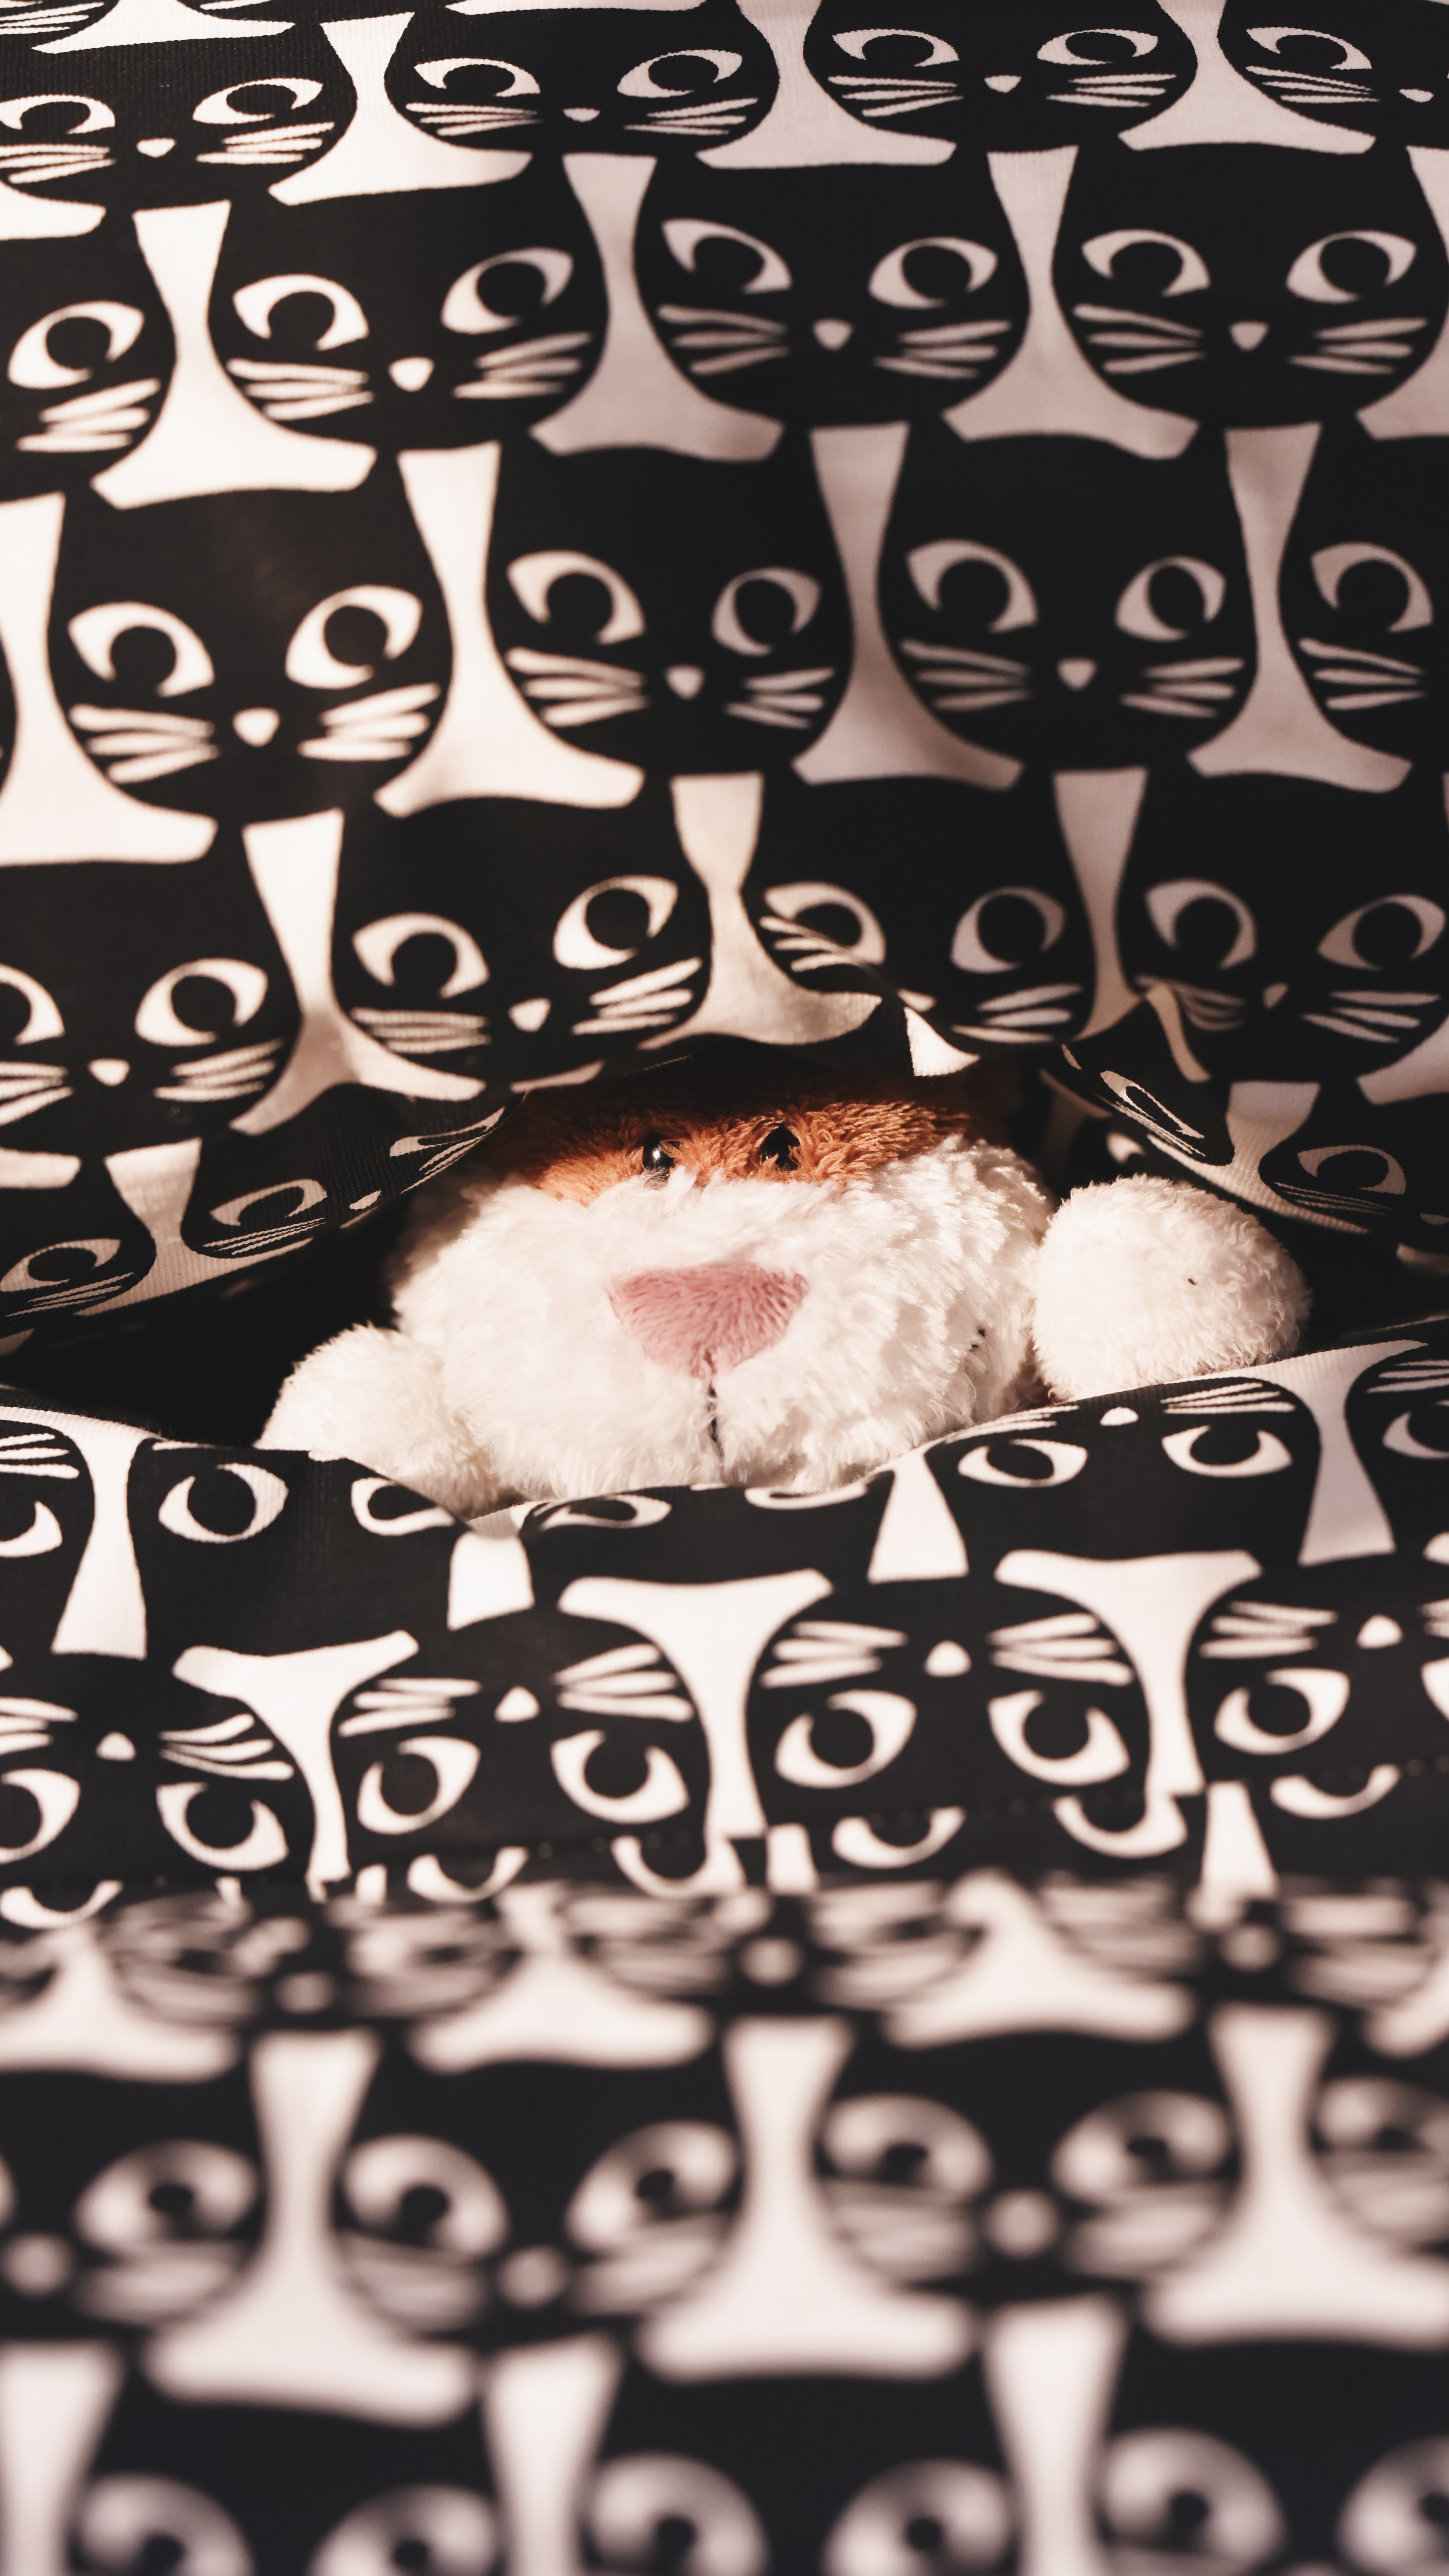 cats, miscellanea, miscellaneous, pattern, plush, toy, peek out, look out